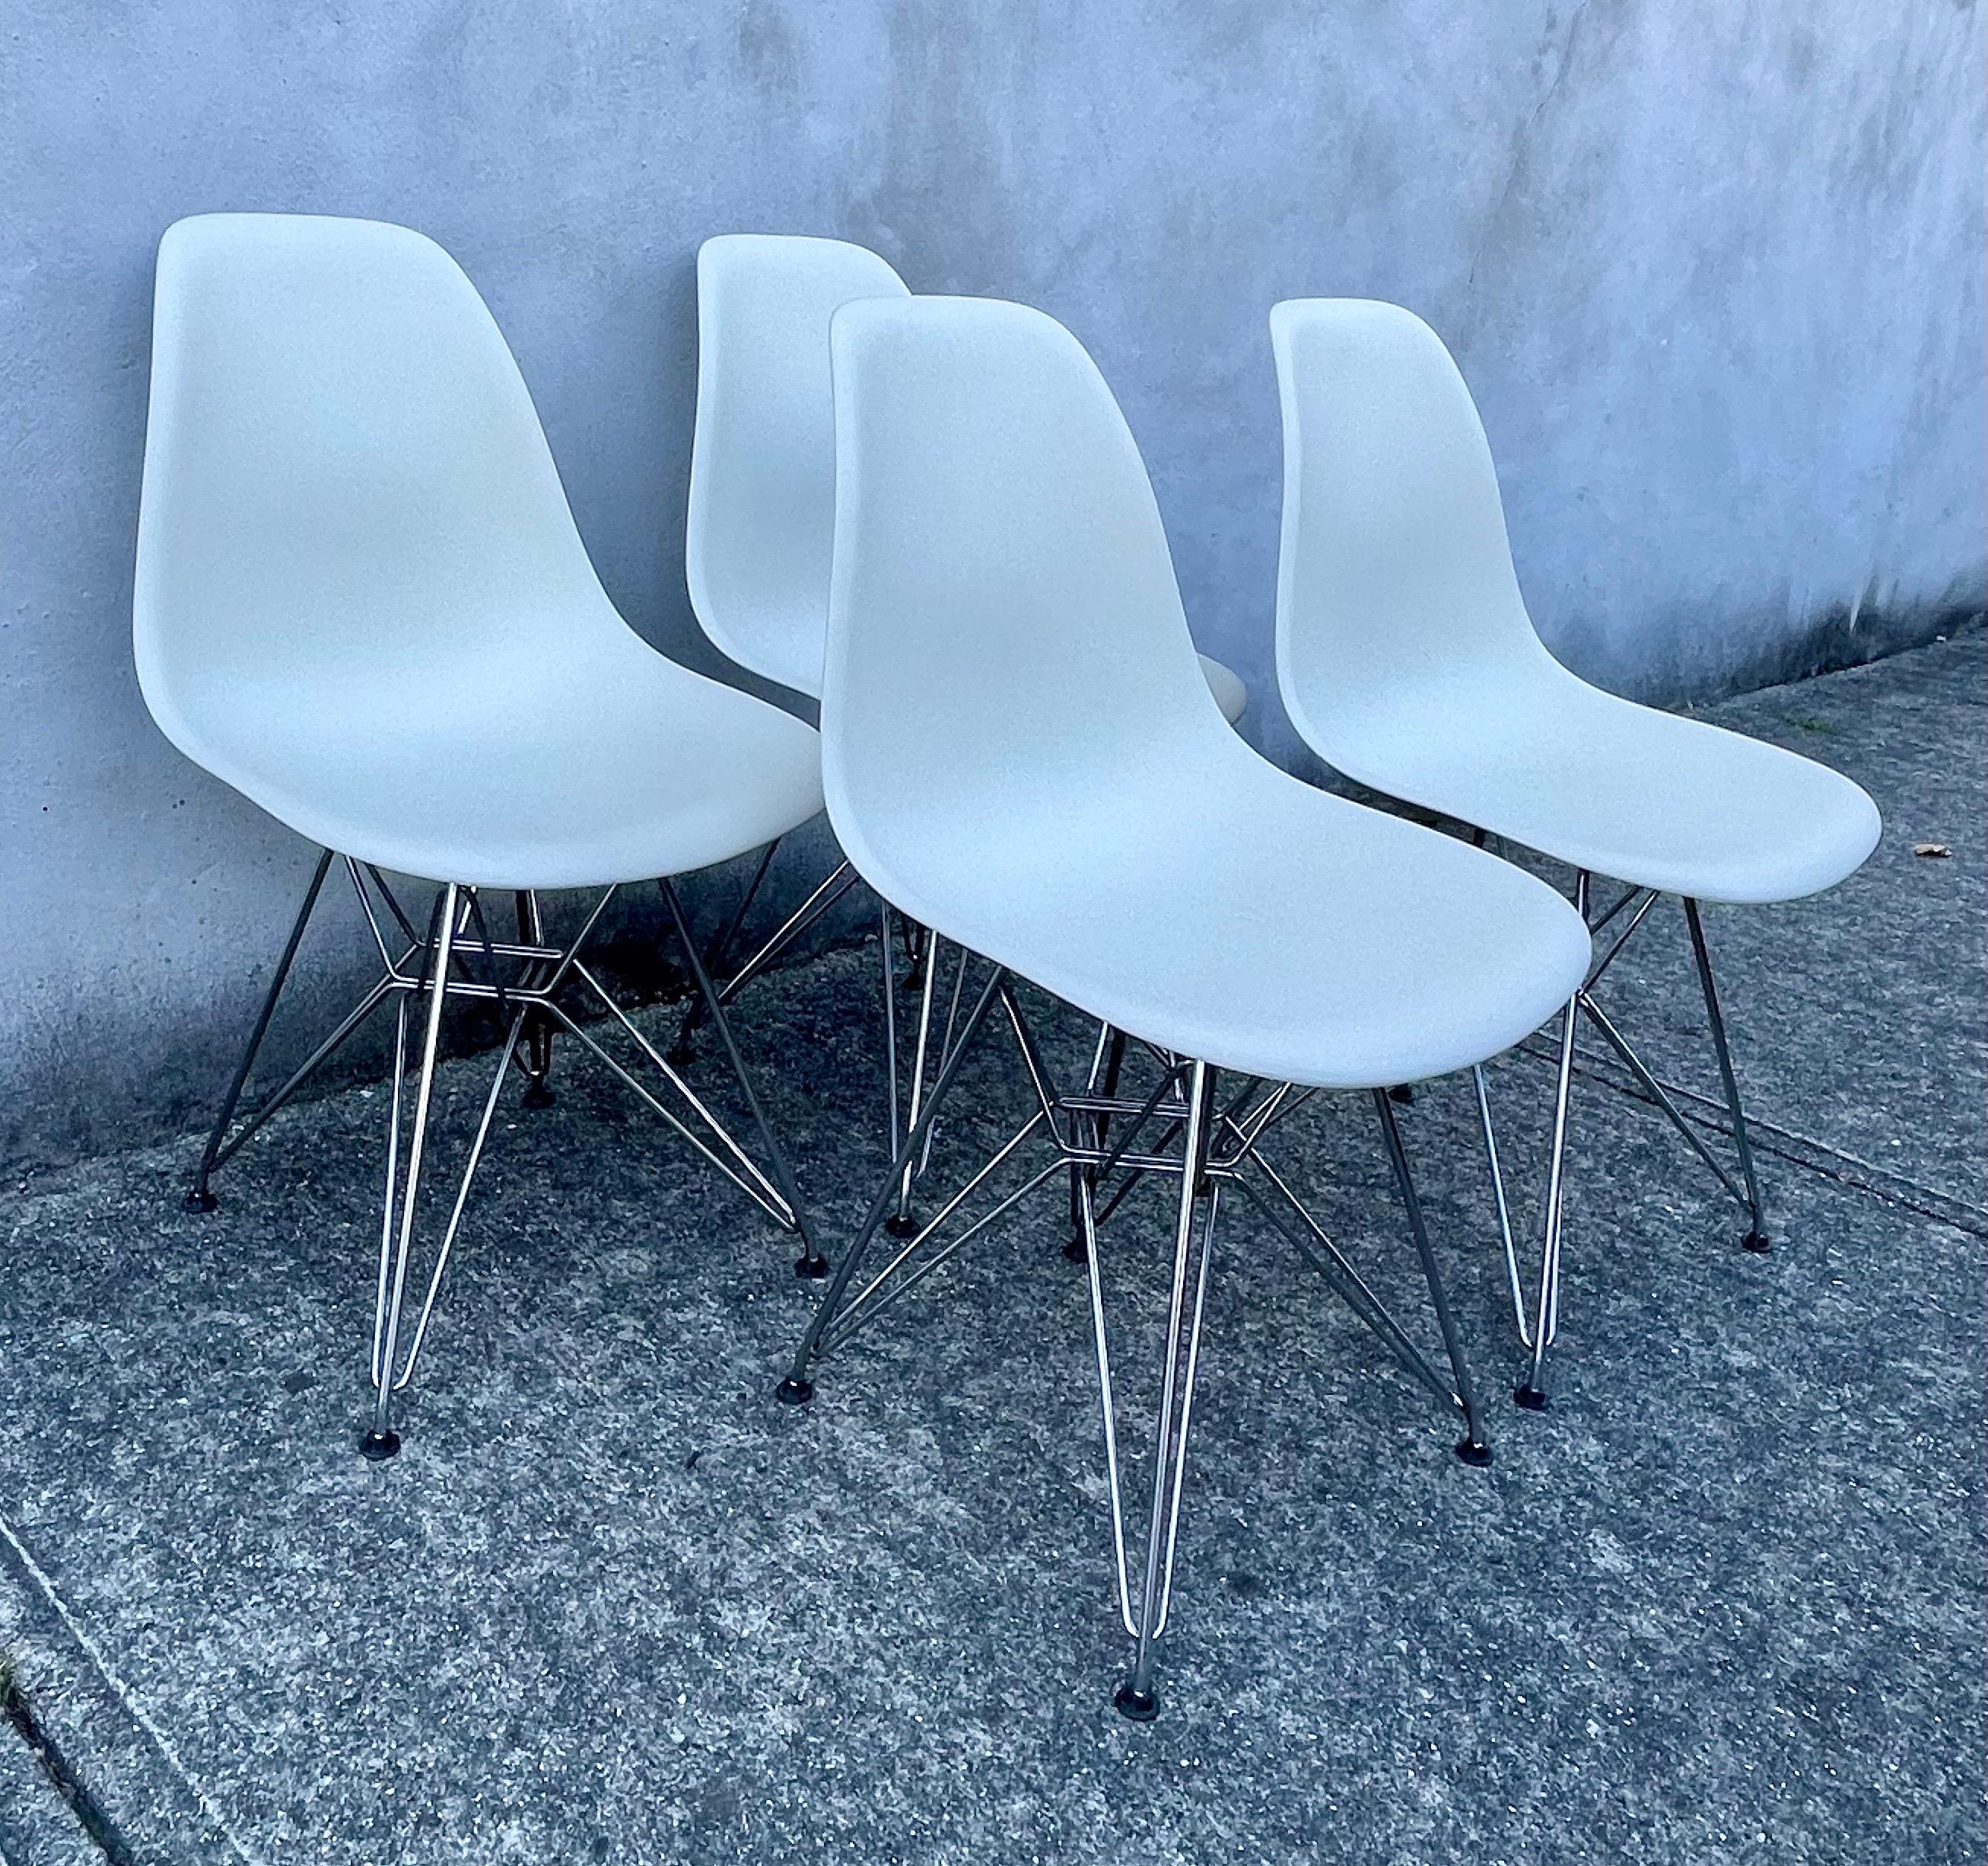 Set of 4 Eames white molded plastic dining chairs with chromed steel Eiffel Tower base, 2010 production.